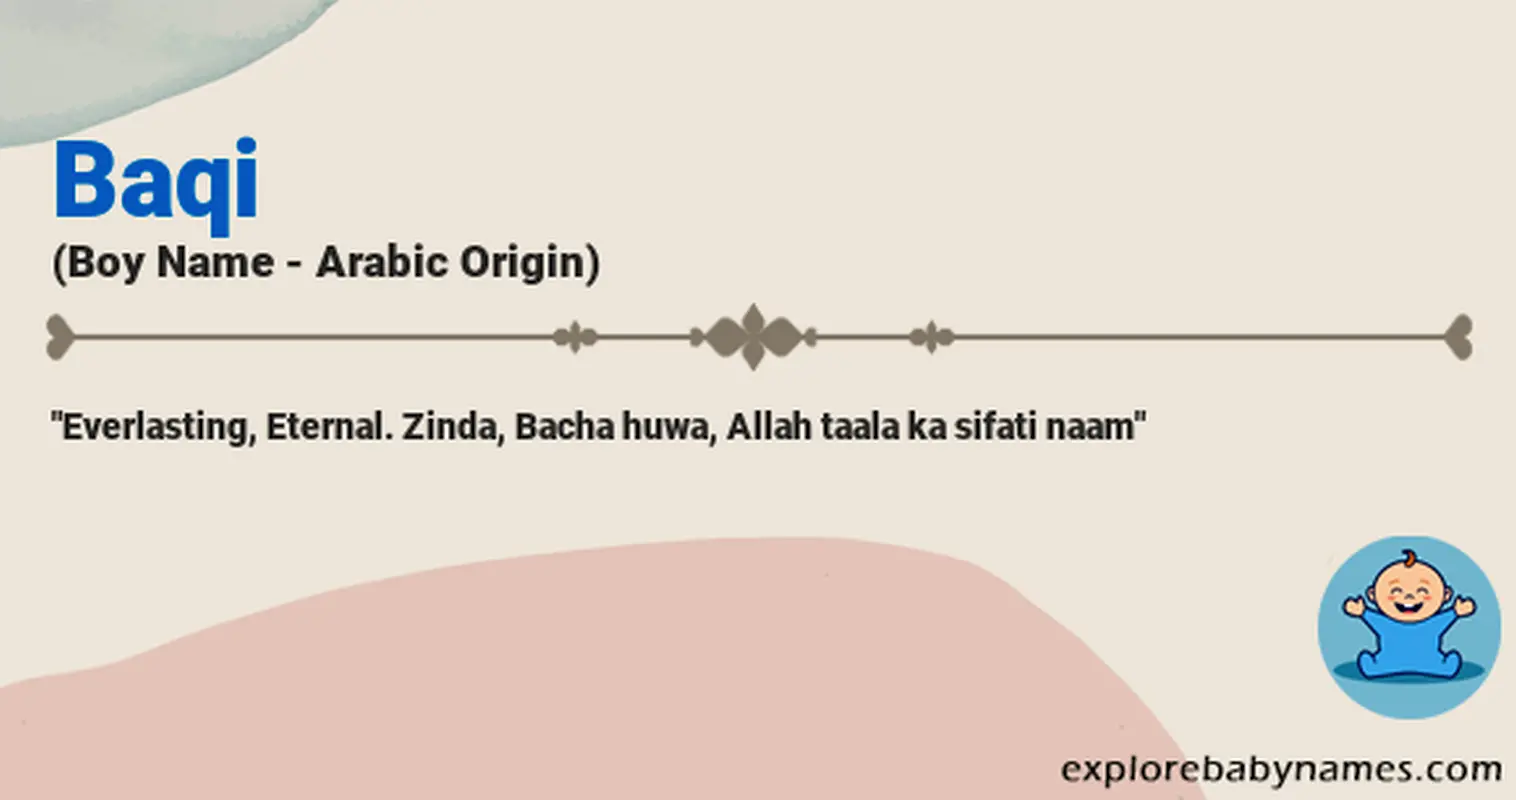 Meaning of Baqi